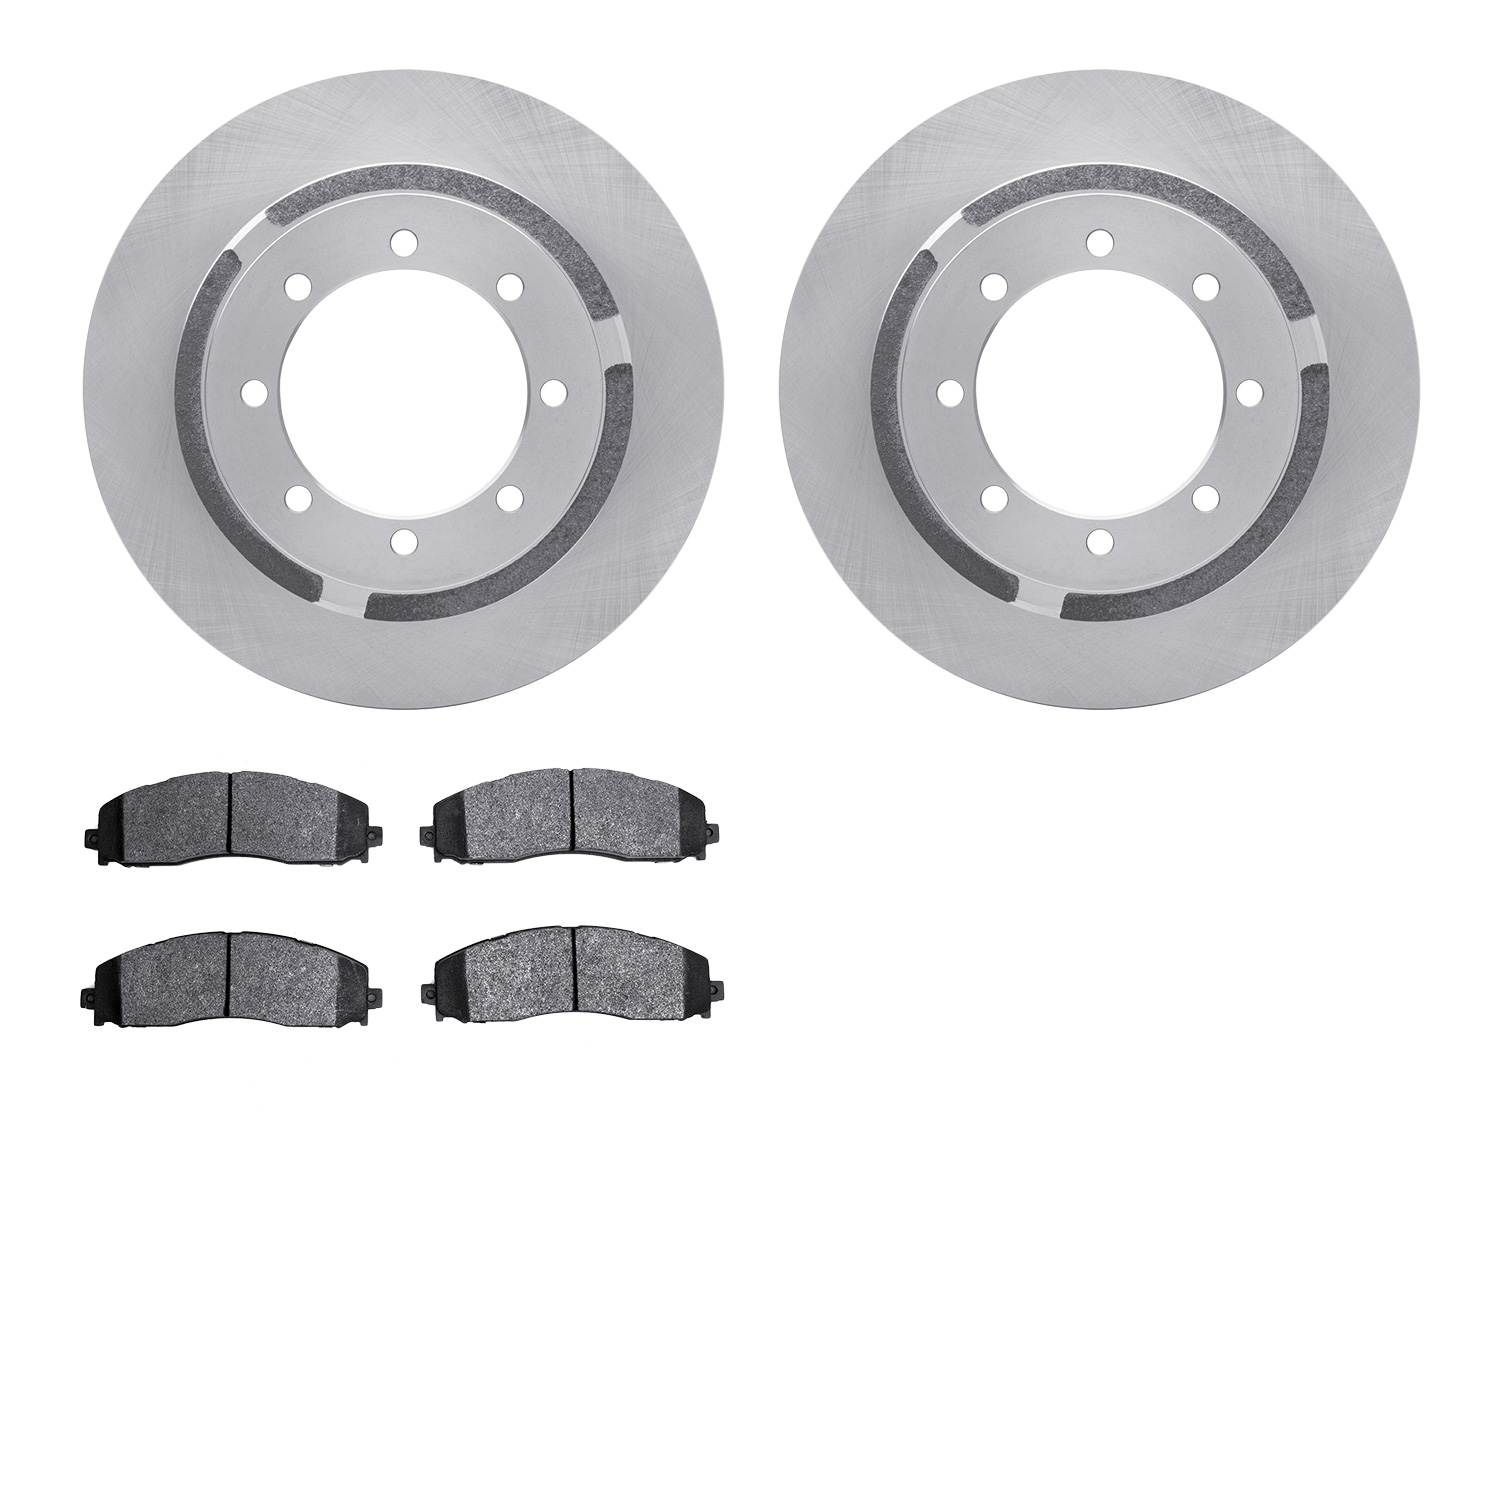 Brake Rotors with Ultimate-Duty Brake Pads, Fits Select